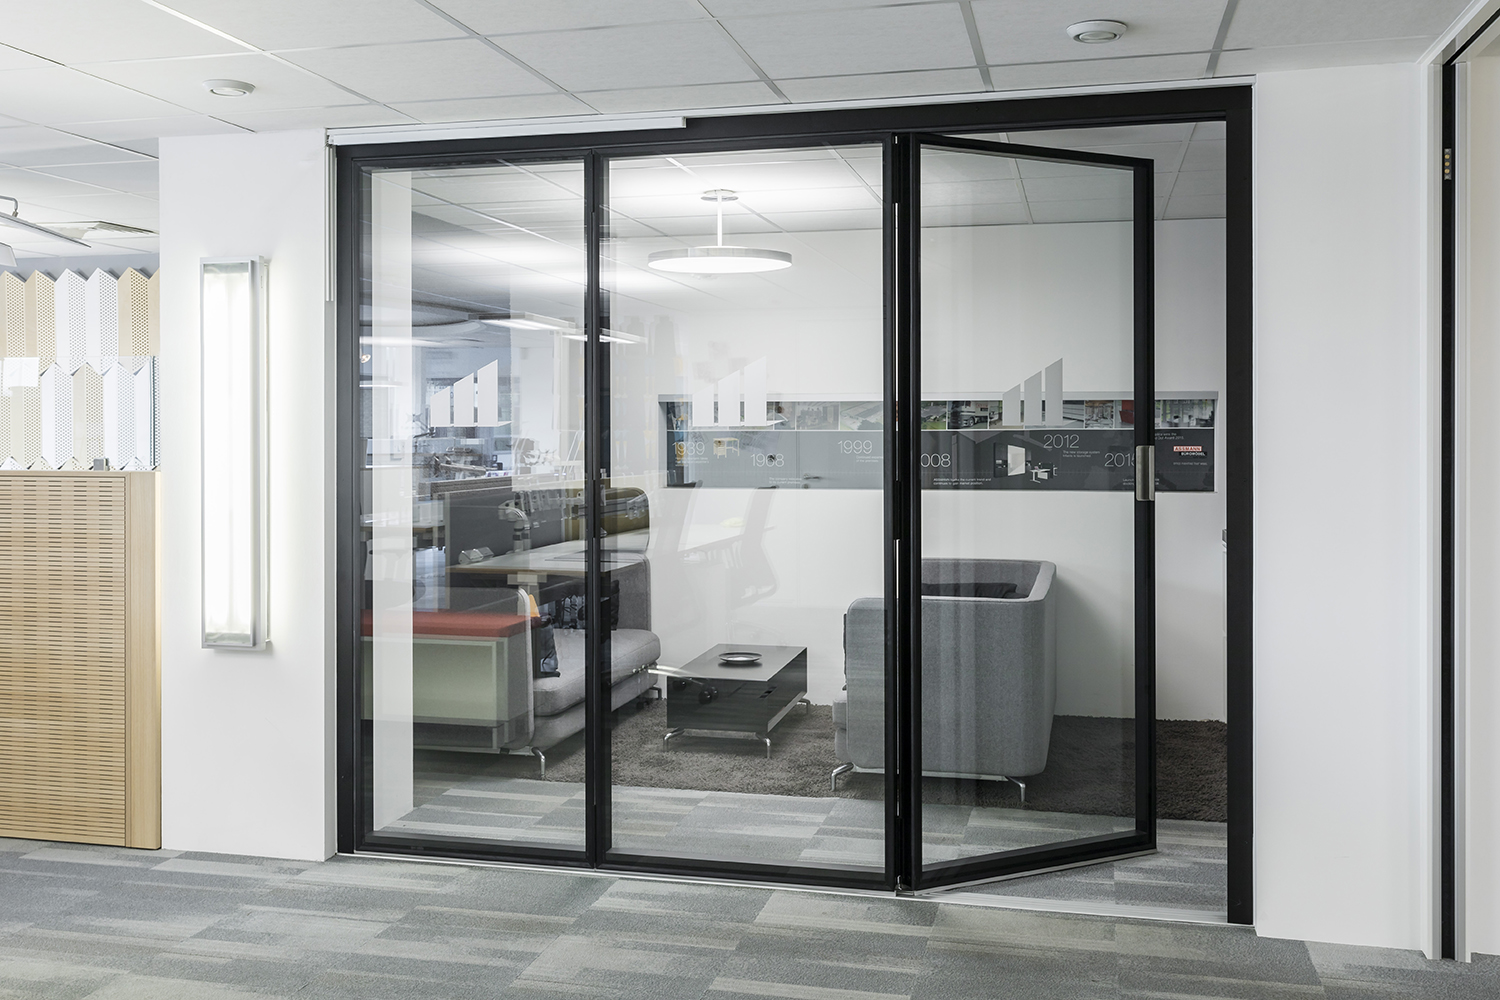 Movawall’s Type G200 system features in new Business School